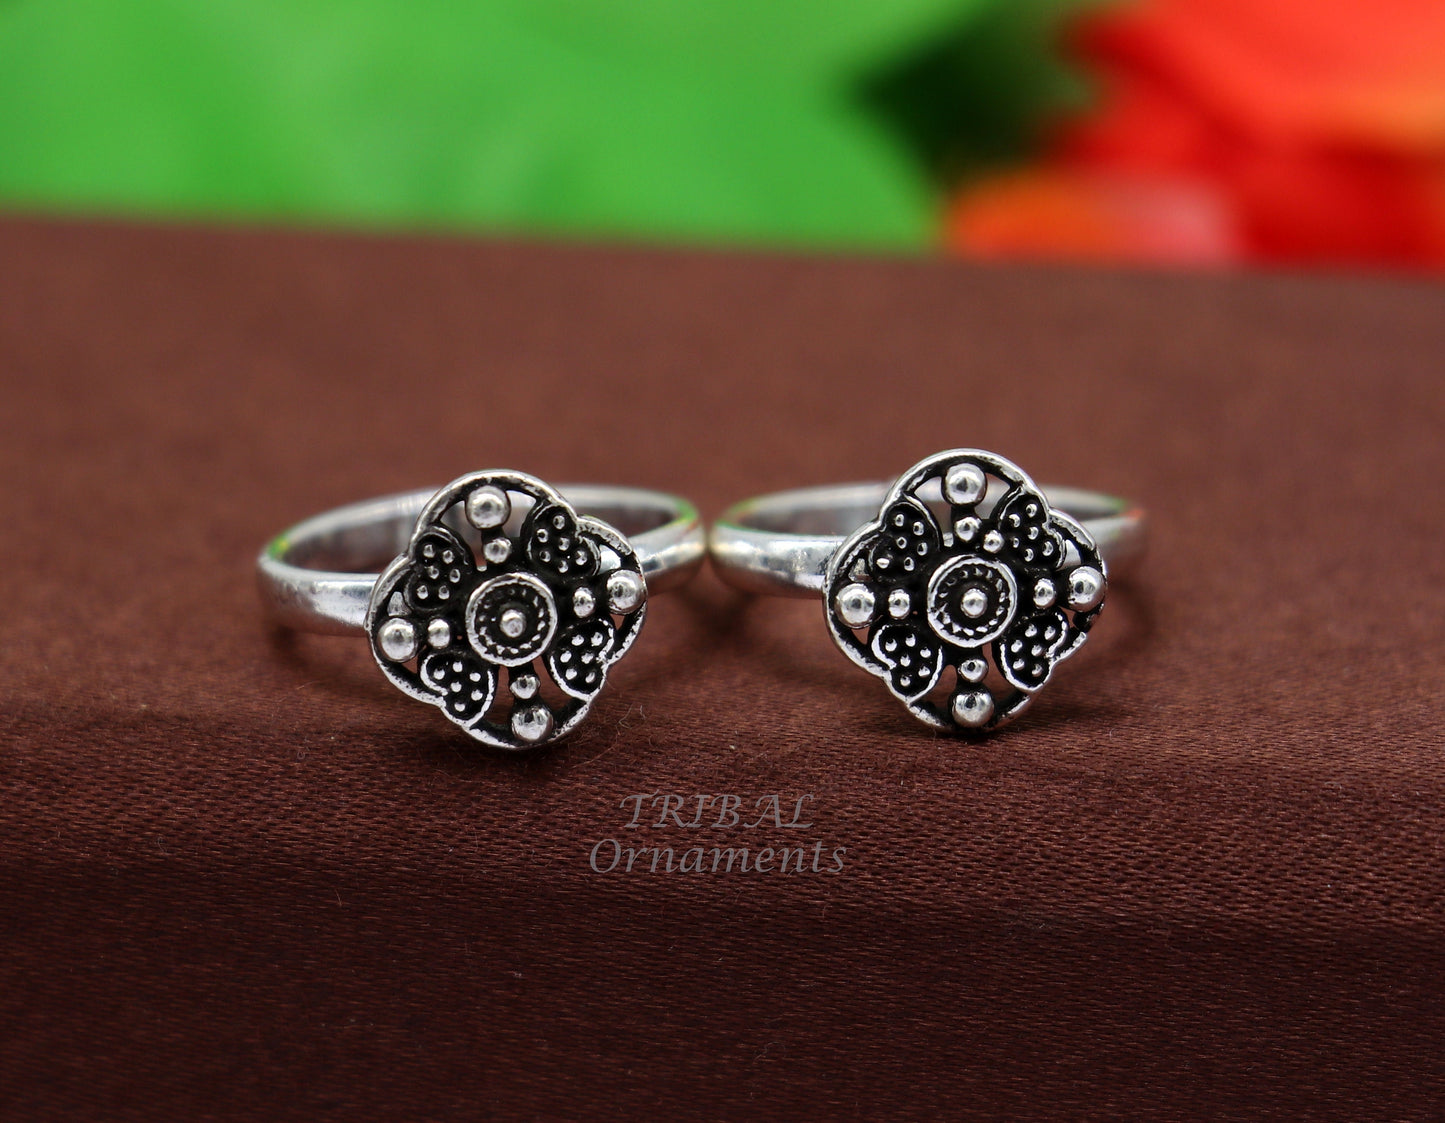 925 sterling silver amazing flower design handmade toe ring, toe band stylish modern women's brides jewelry, india traditional jewelry ytr53 - TRIBAL ORNAMENTS